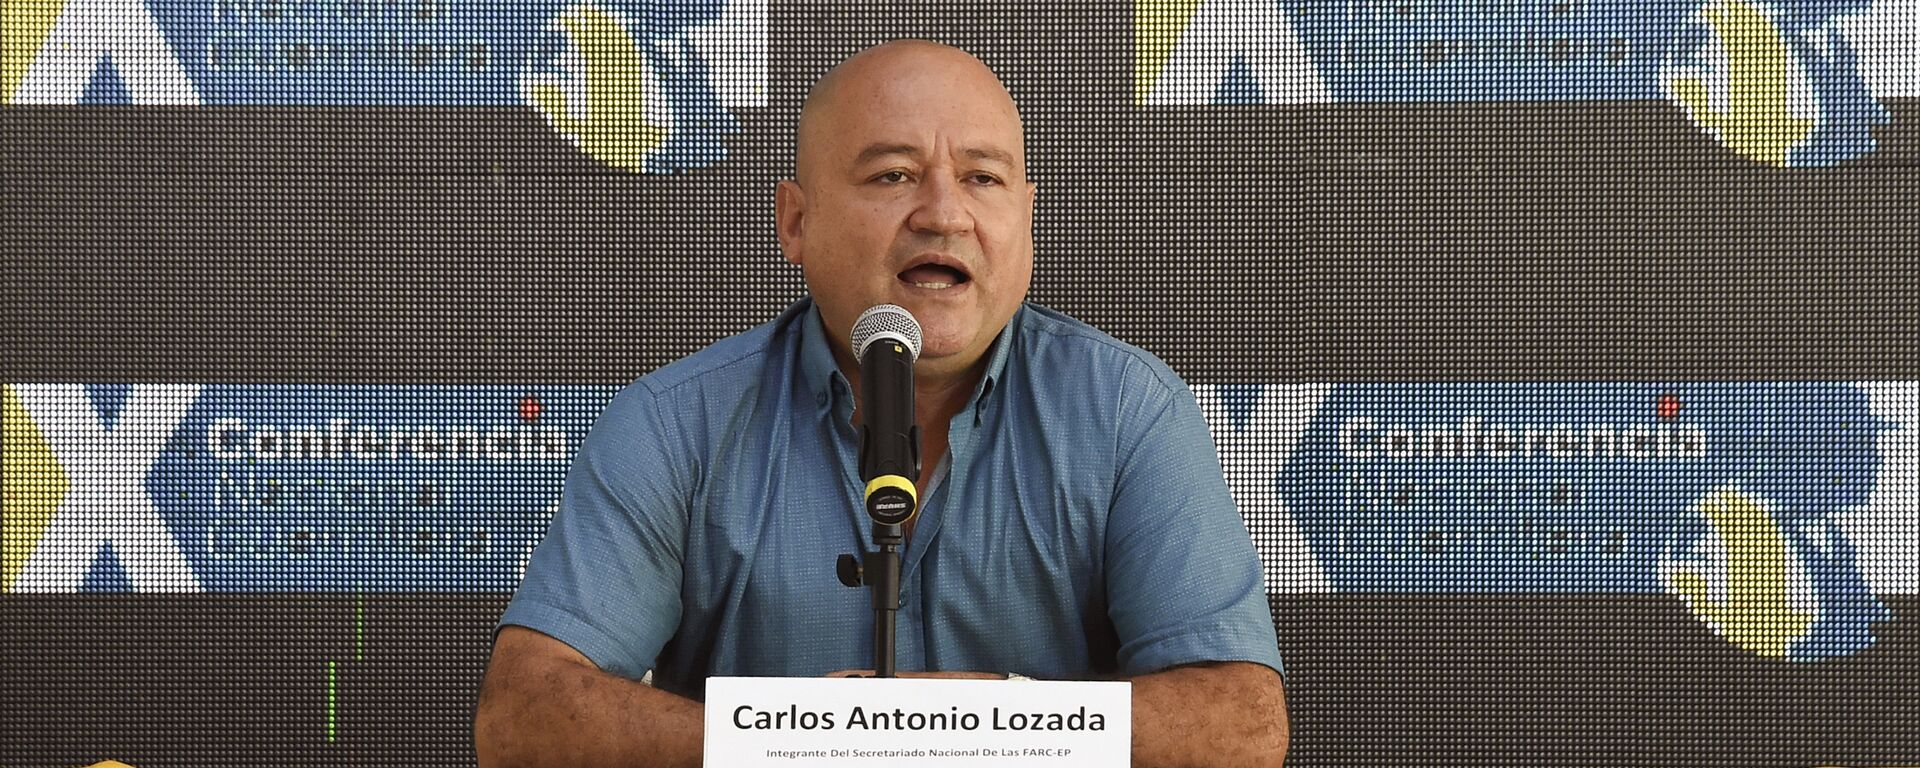 Commander Carlos Antonio Lozada, member of the direction of the Revolutionary Armed Forces of Colombia (FARC), speaks during the 10th National Guerrilla Conference in Llanos del Yari, Caqueta department, Colombia, on September - Sputnik Mundo, 1920, 19.04.2021